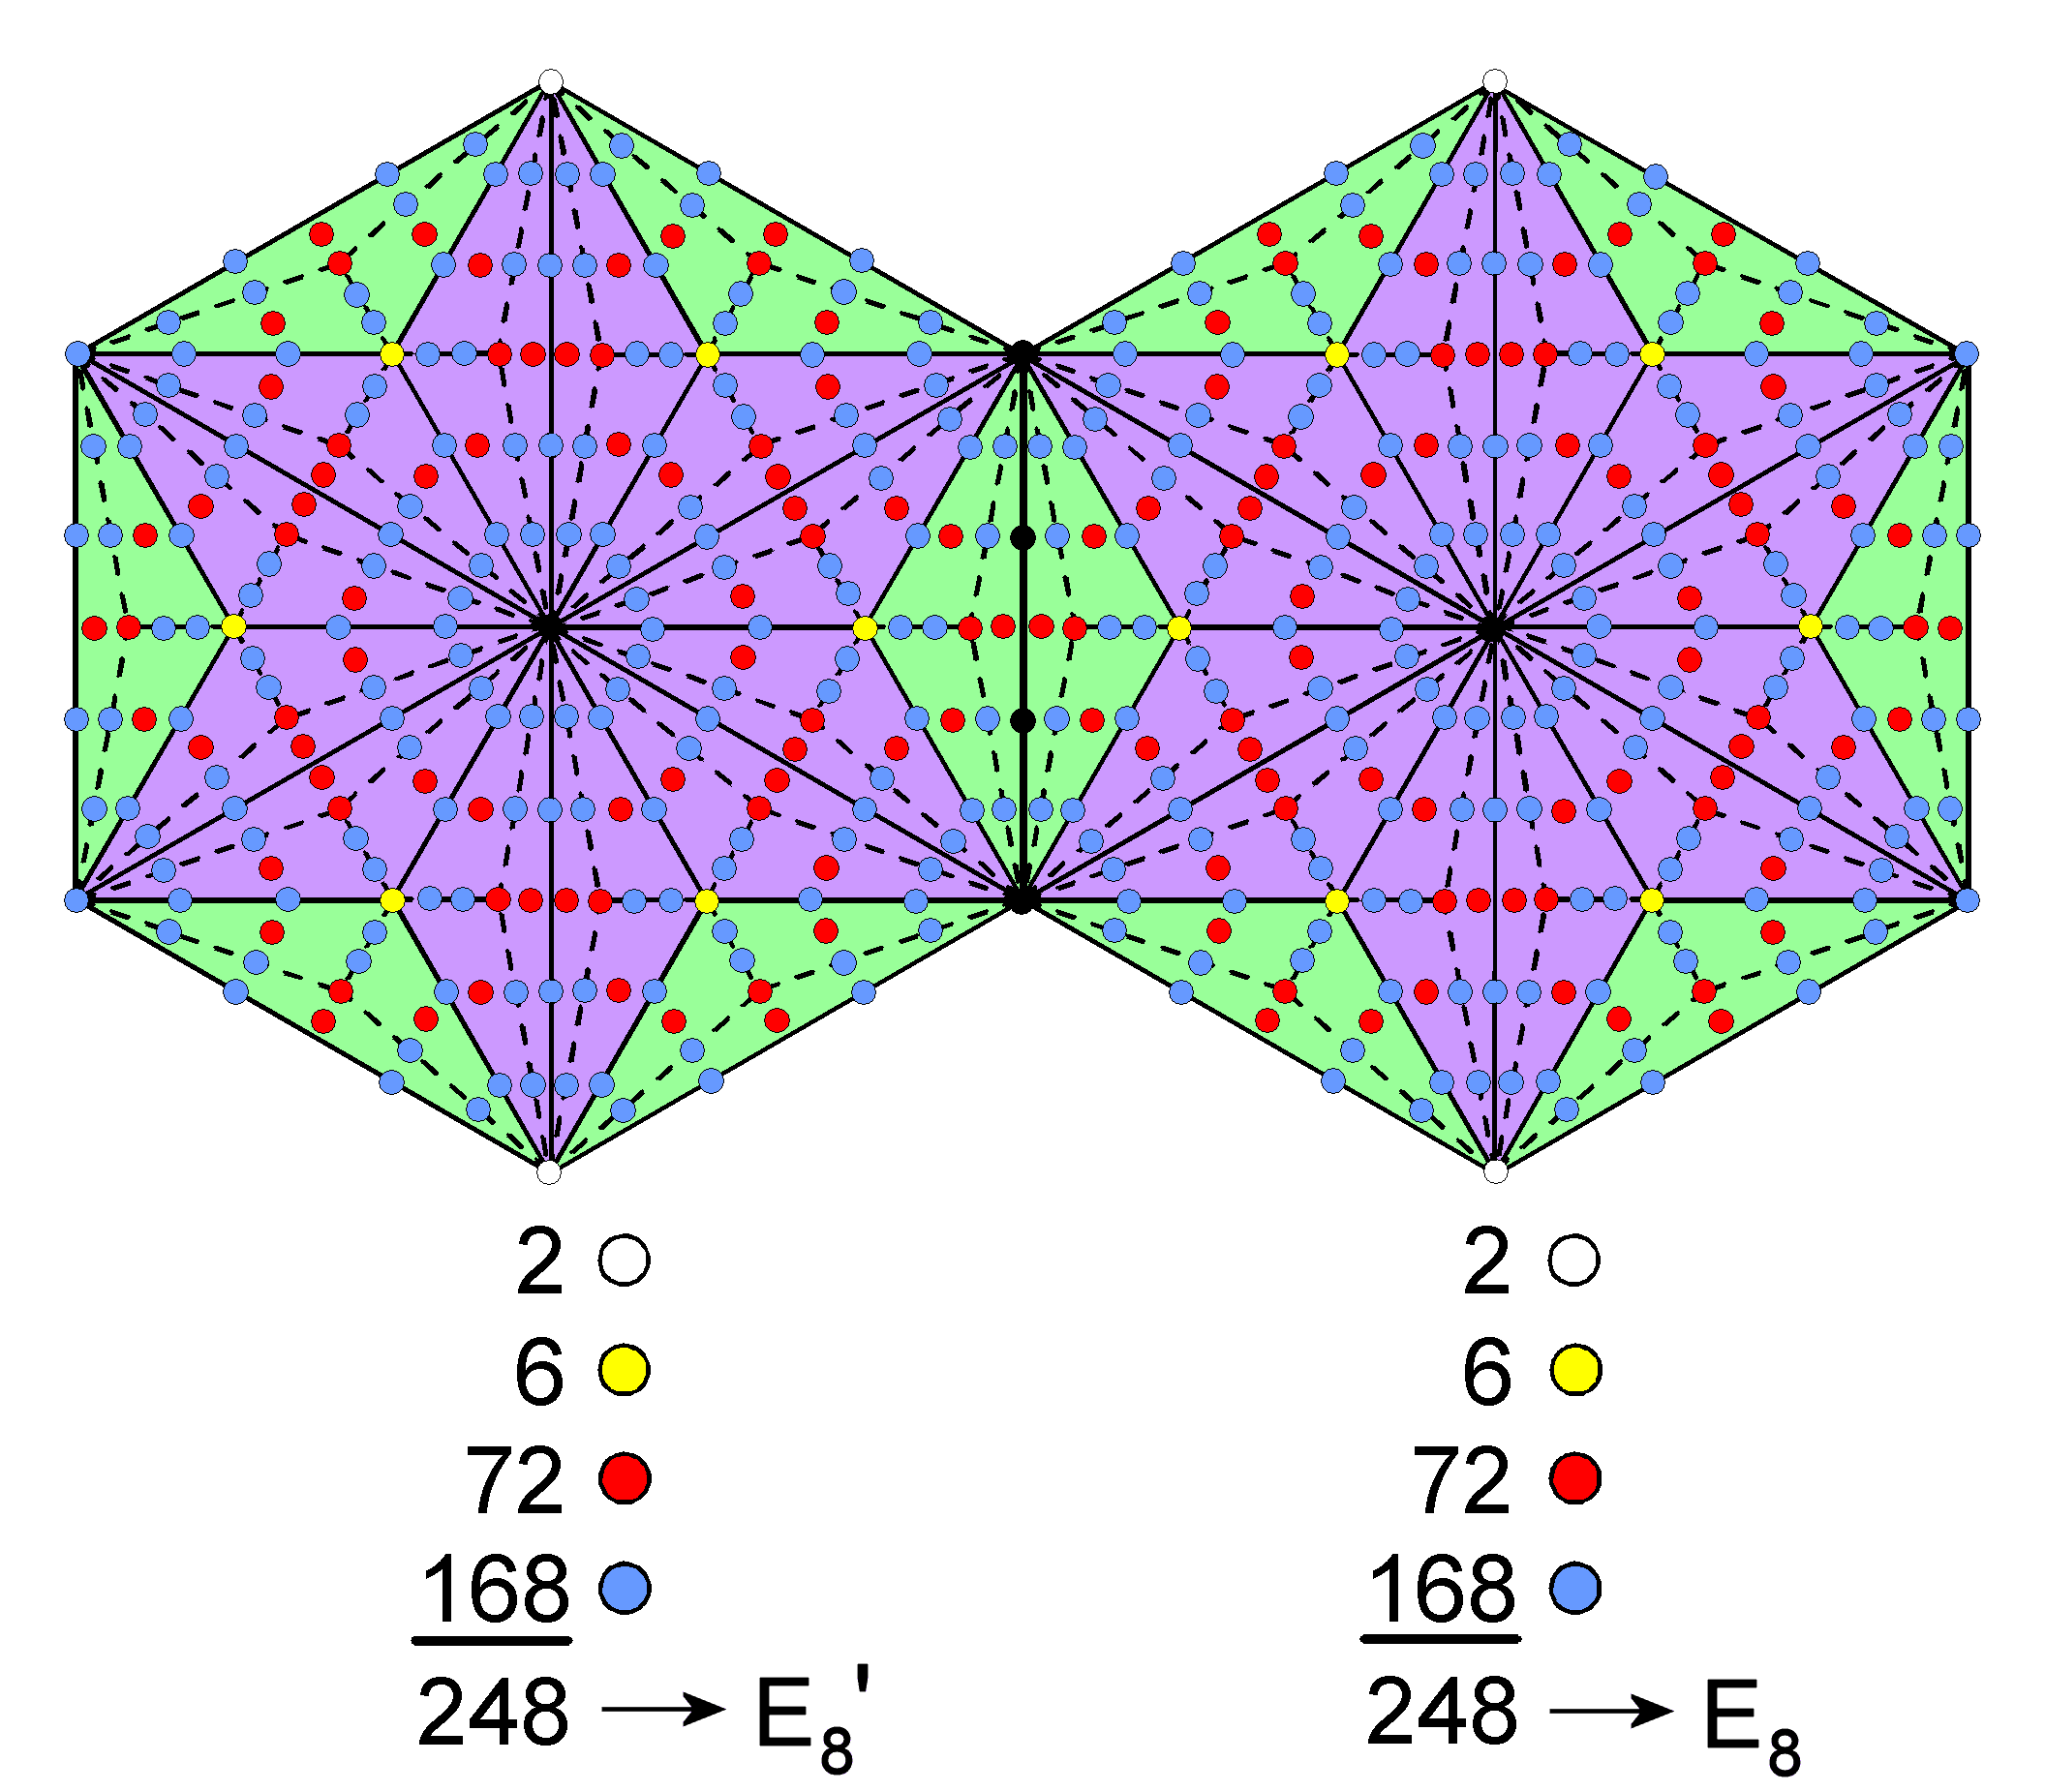 Two joined Type C hexagons embody 496 roots of E8xE8